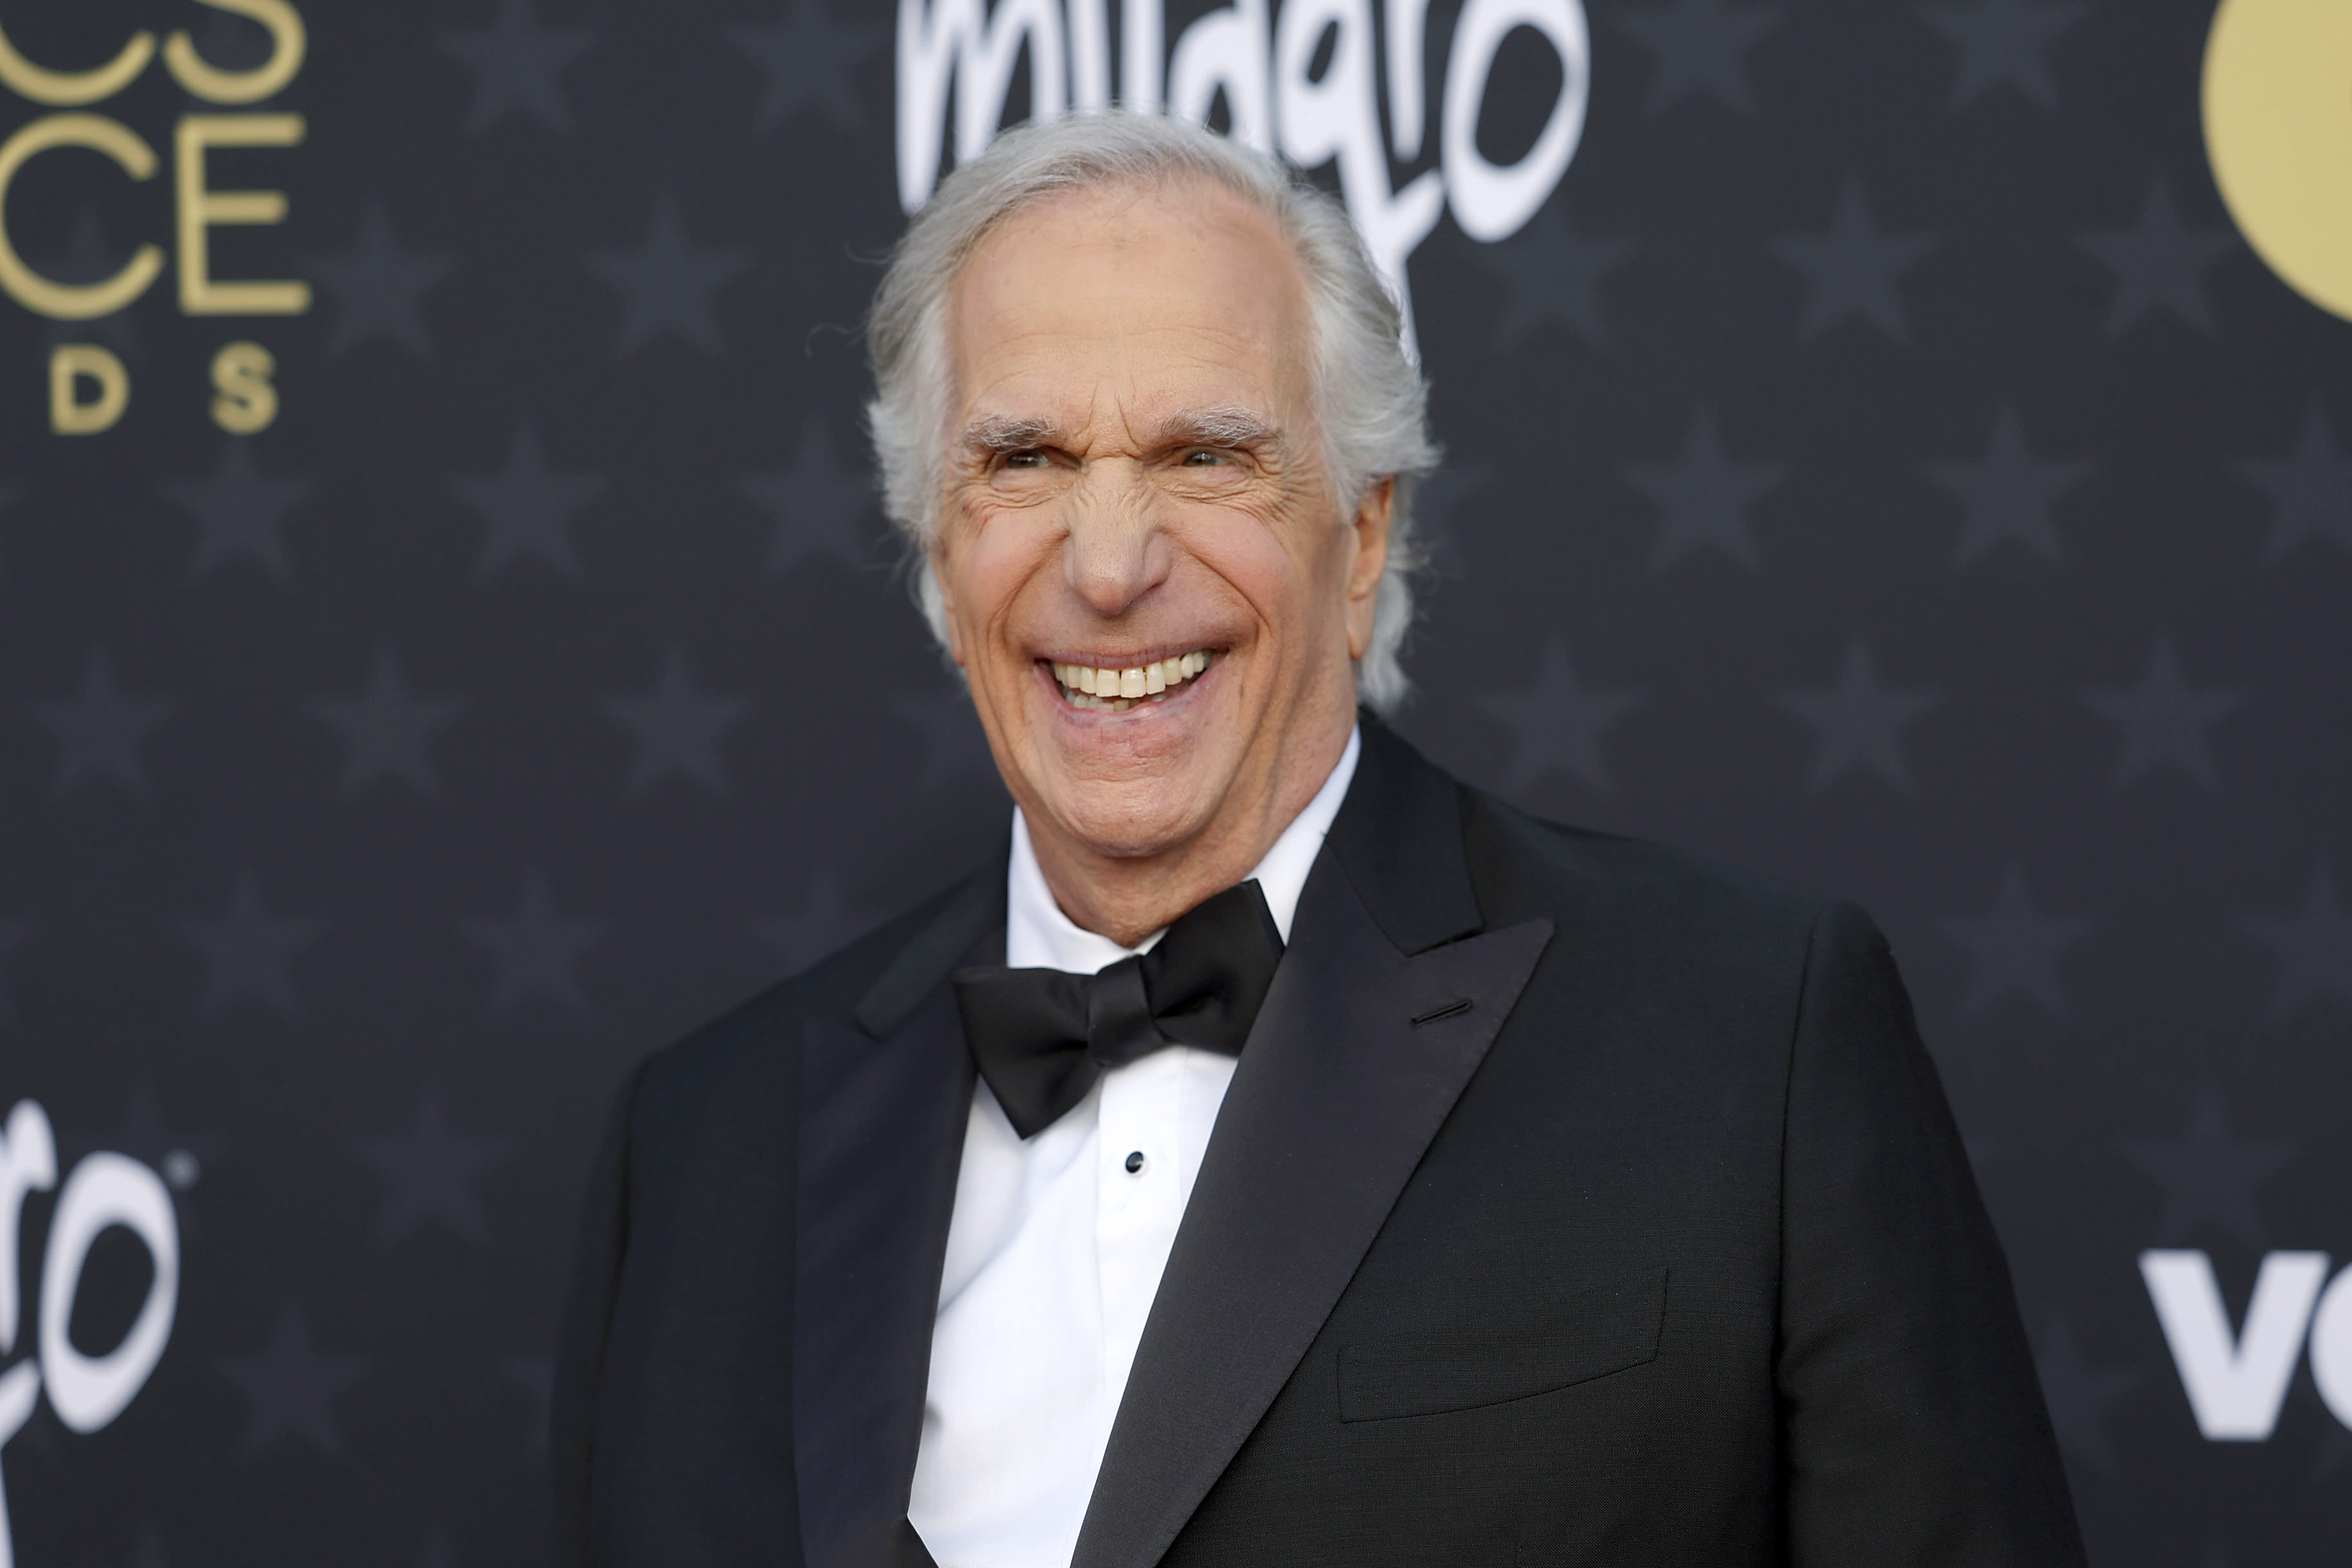 Henry Winkler Receives Jewish Culture and Activism Award With Daughter Zoe: “We Are Still Here”